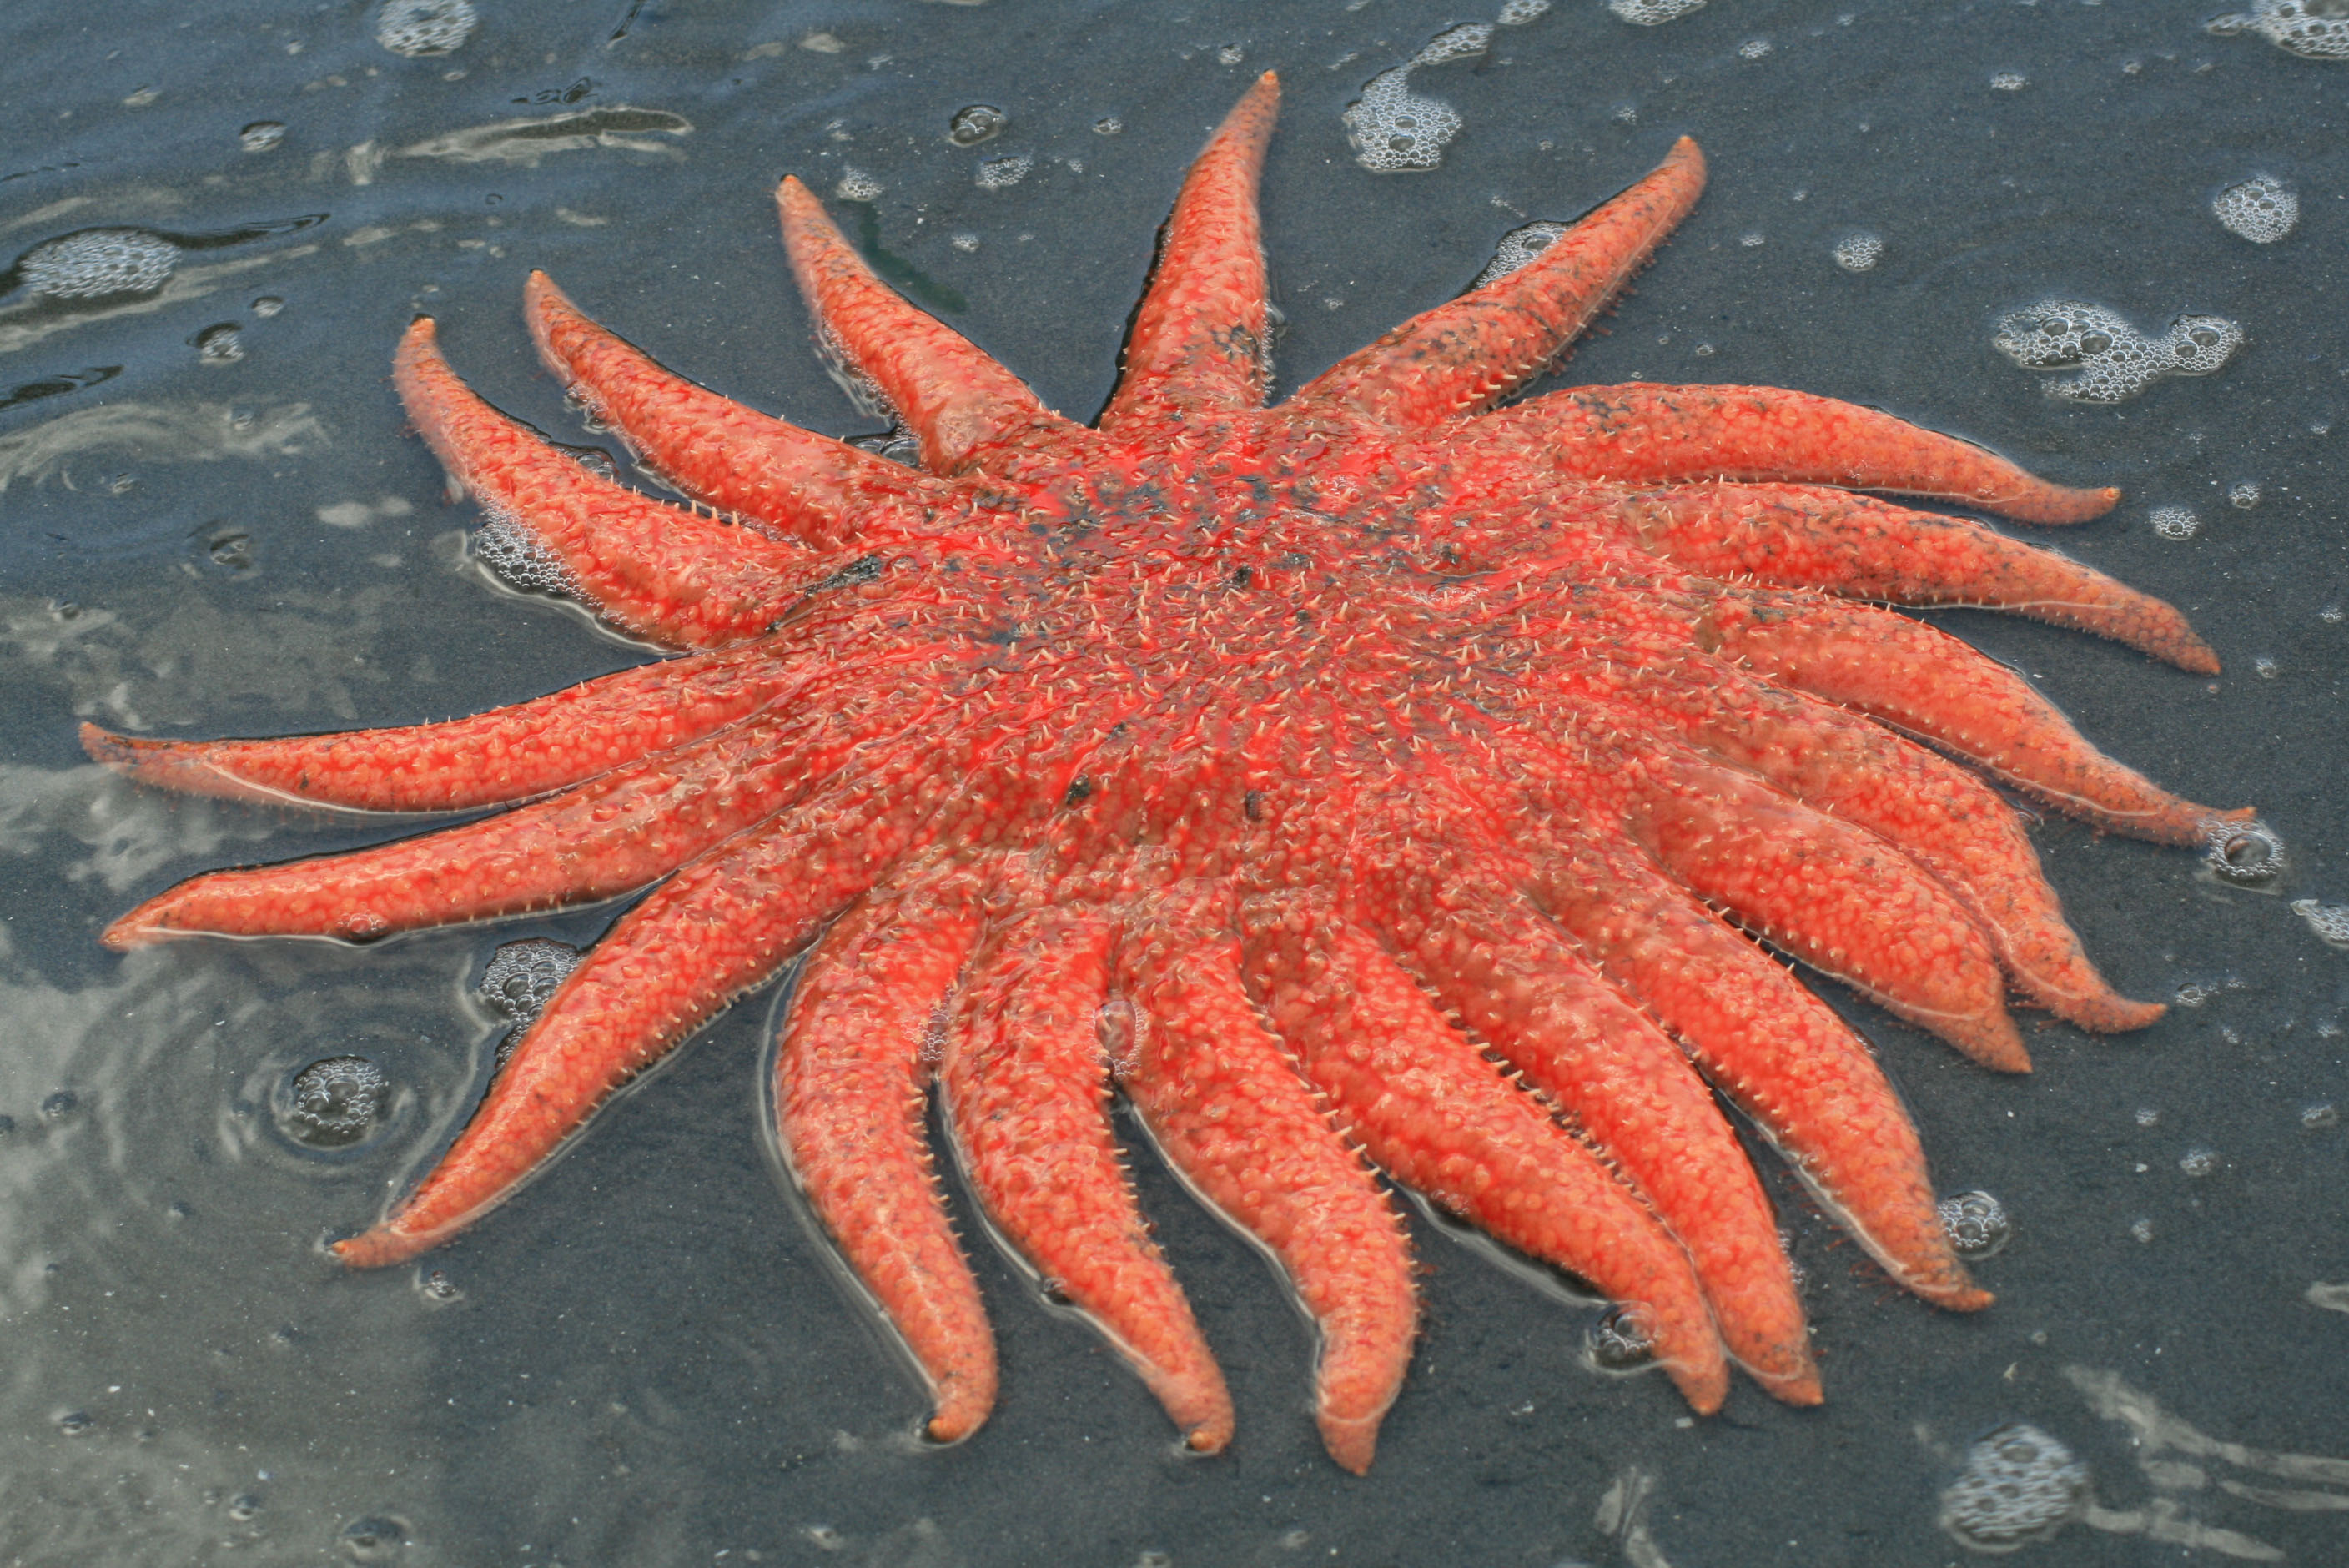 Sea Star Wasting Disease | Our Life in the Pacific Northwest